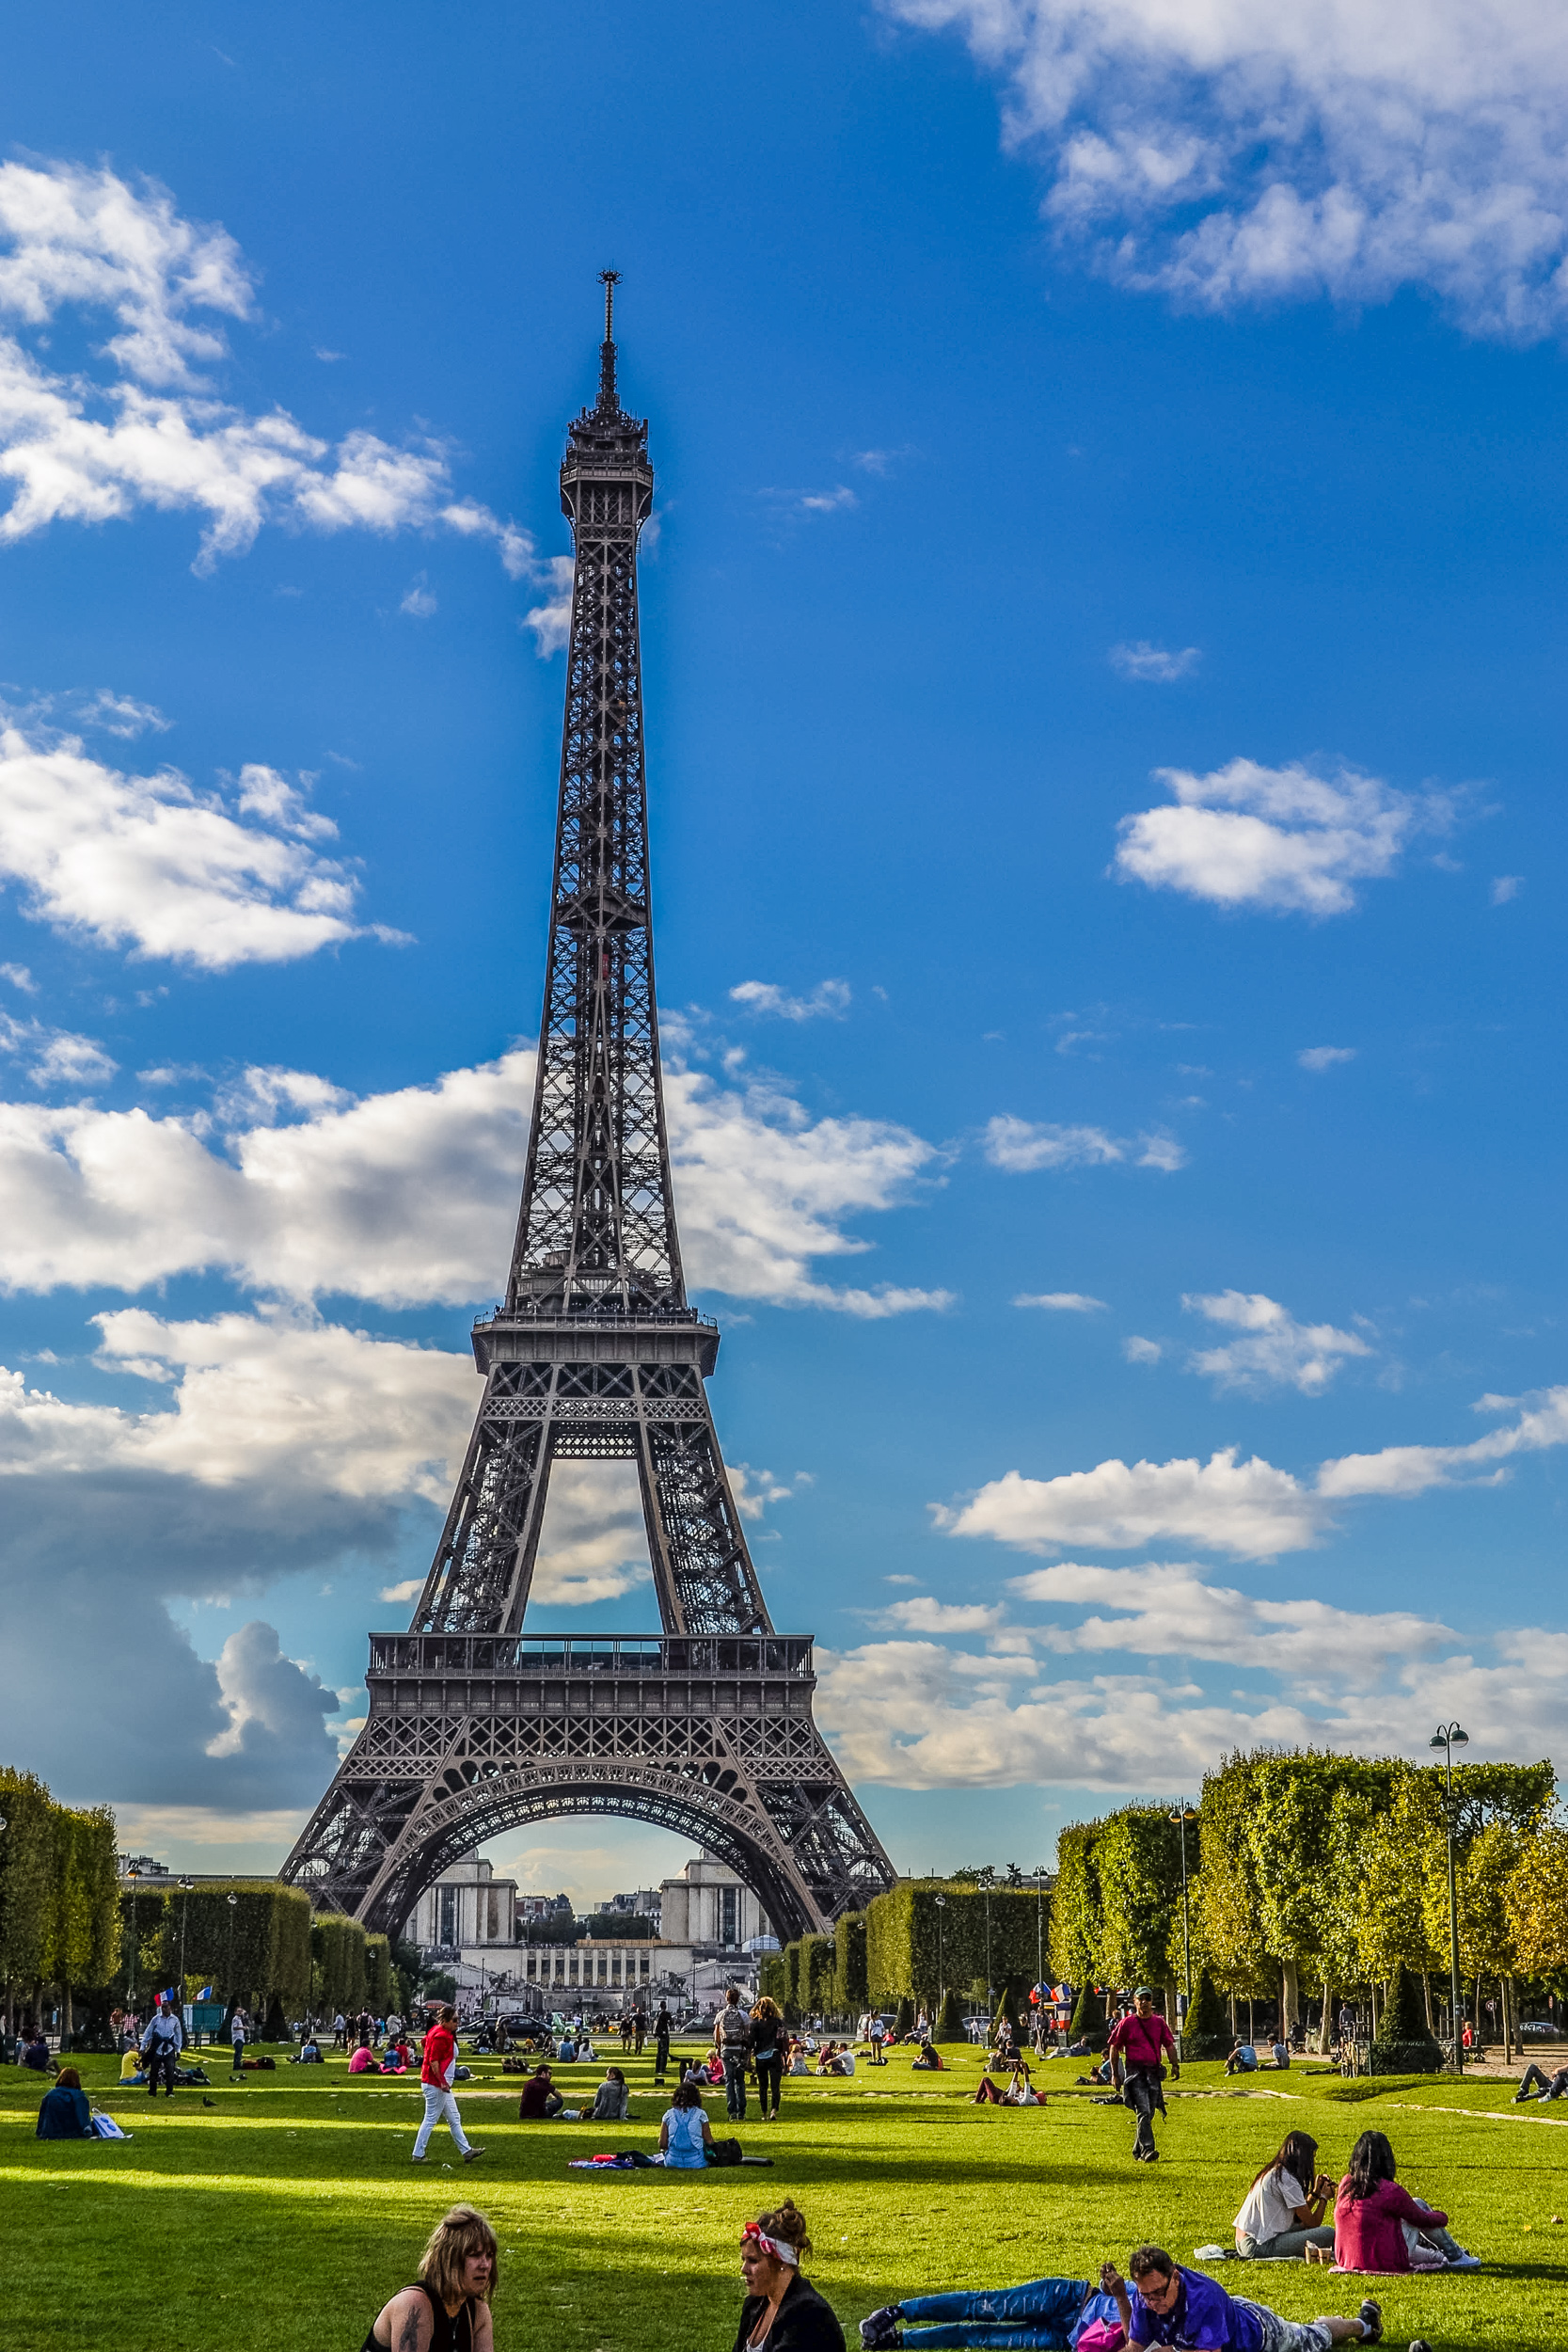 Reasons to Visit the Eiffel Tower - Exploring Our World